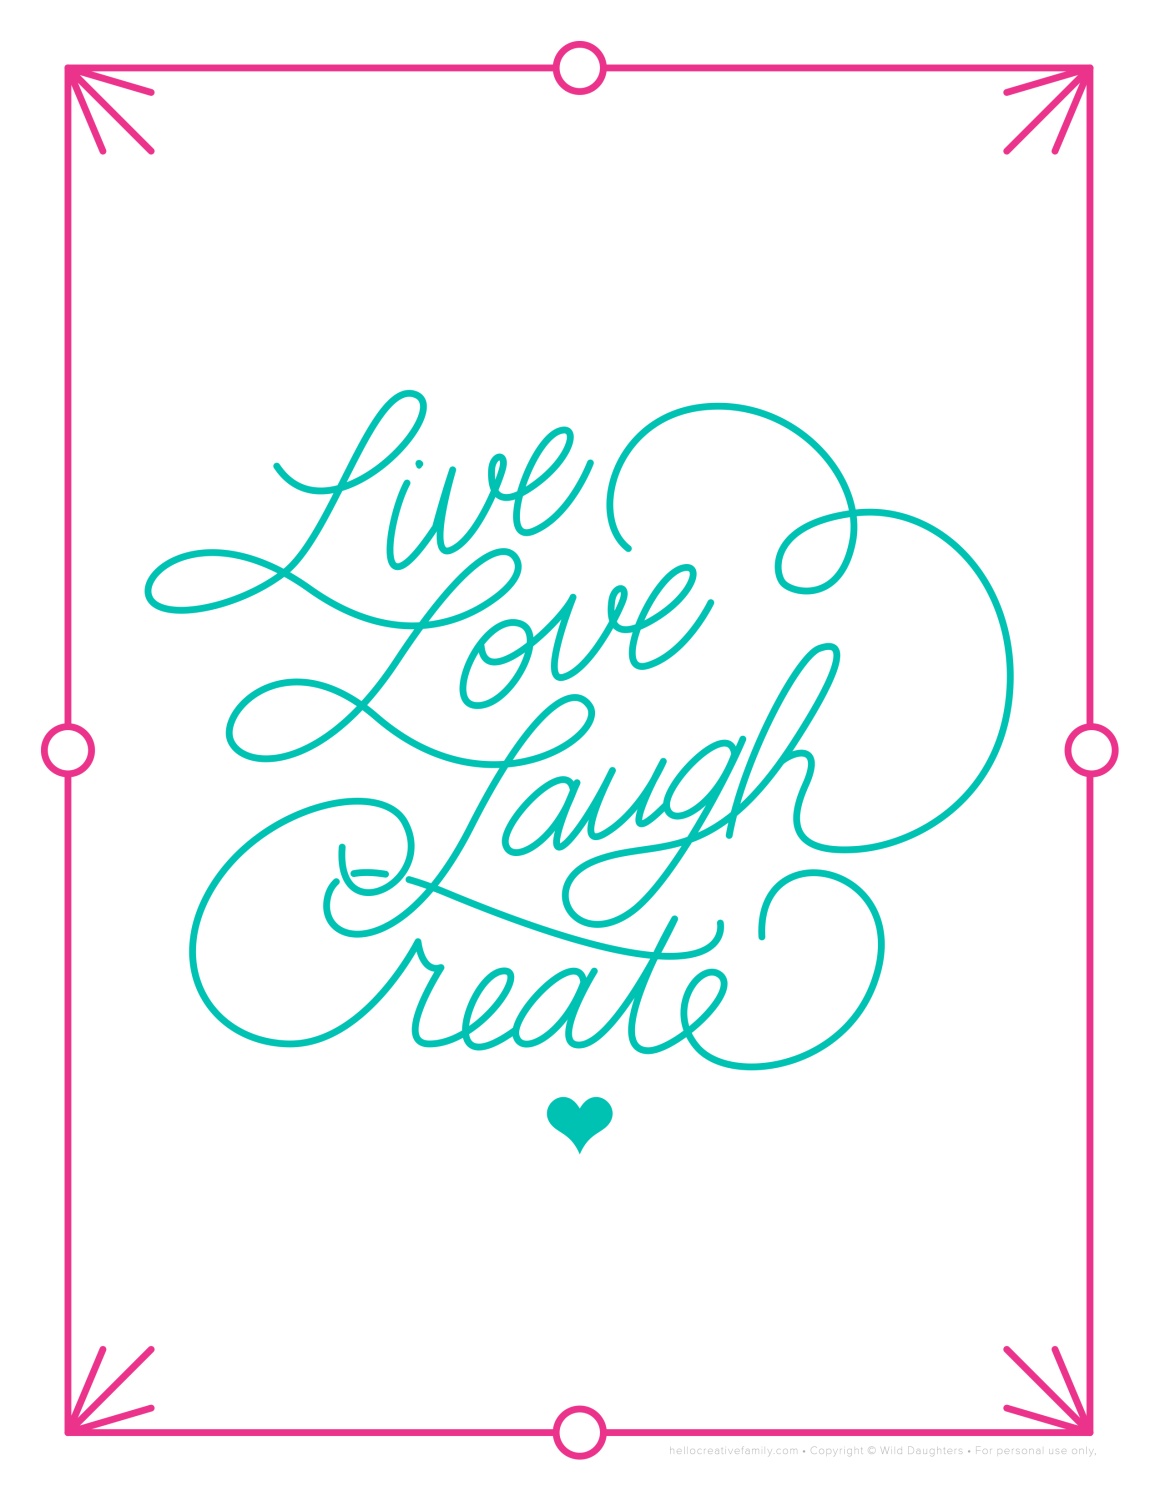 Live Love Laugh Create printable for Hello Creative Family. Created by Wild Daughters. Lovely inspiration.  